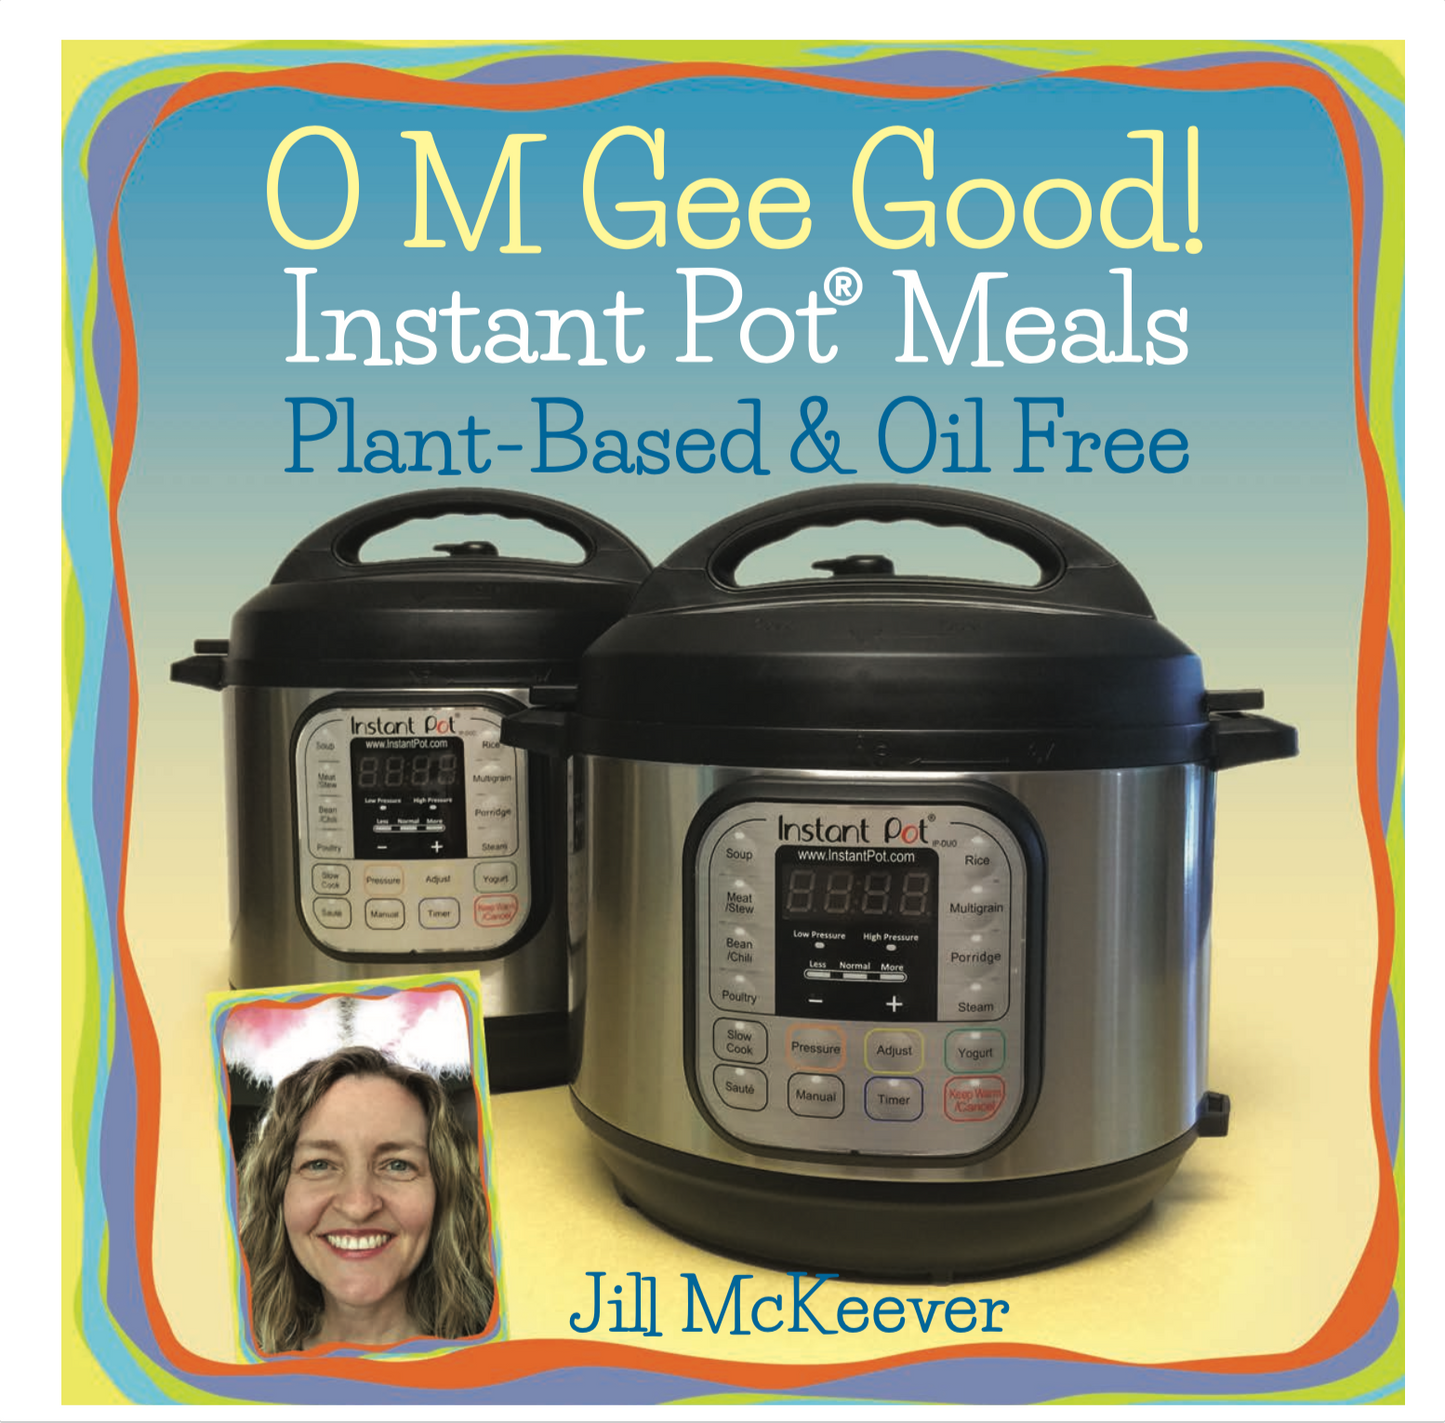 How To Slow Cook in Your Instant Pot - Plant Based Instant Pot